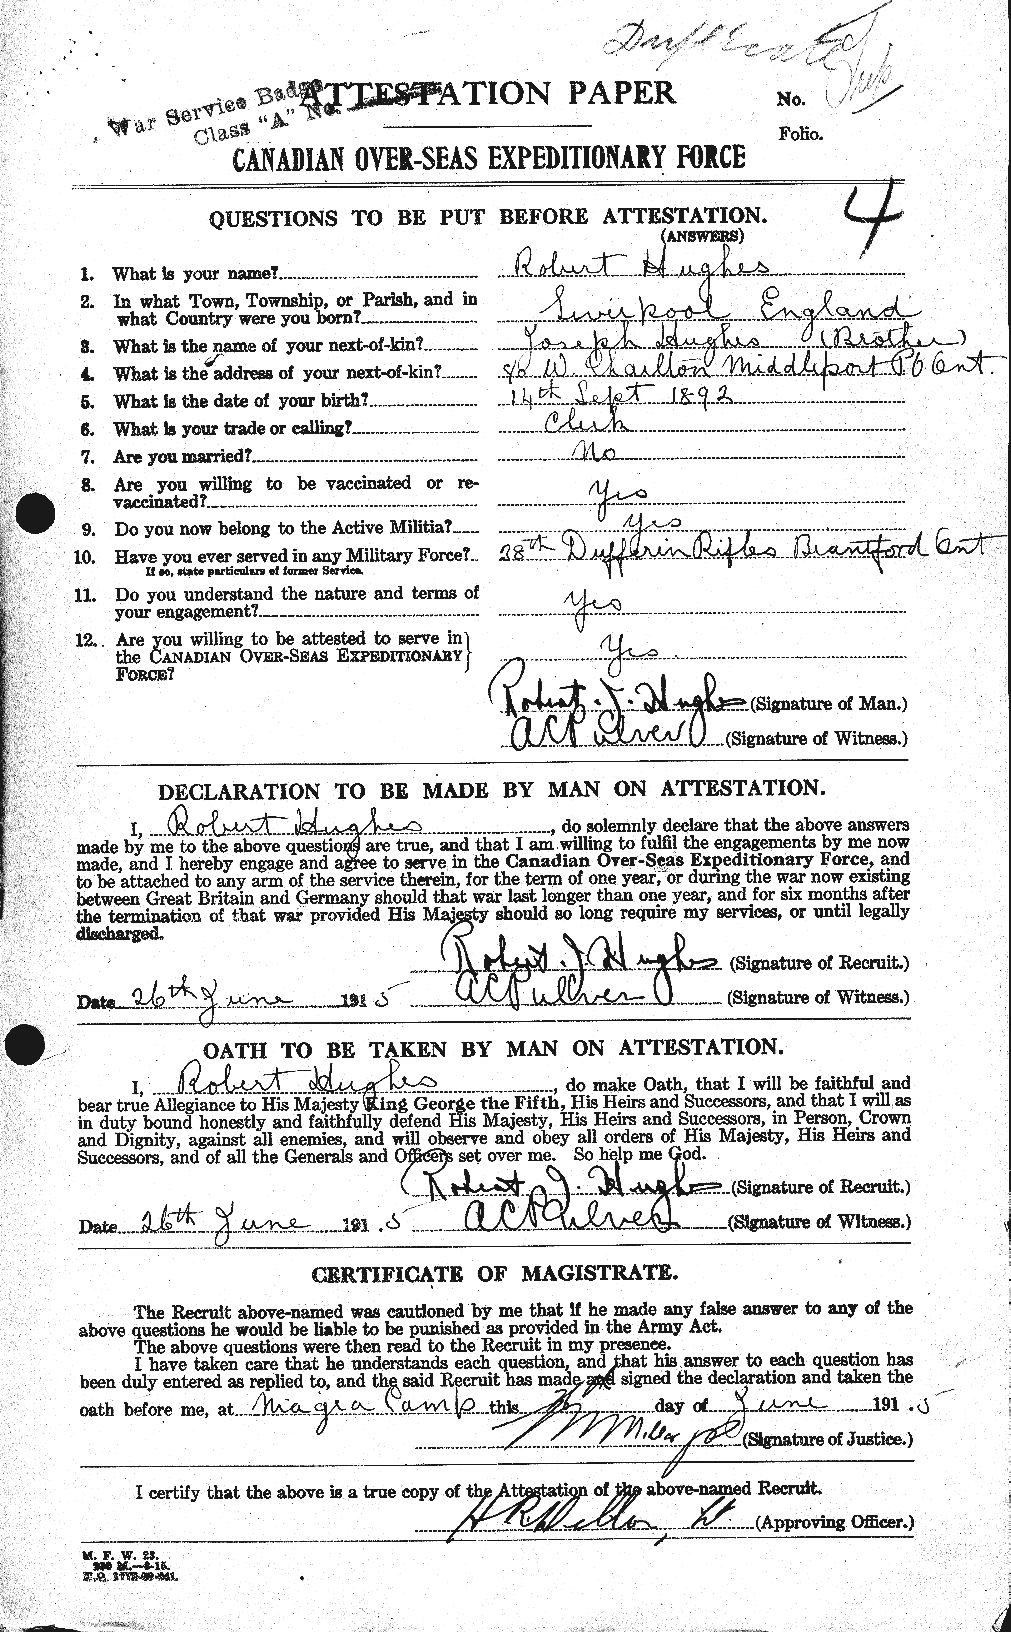 Personnel Records of the First World War - CEF 404193a